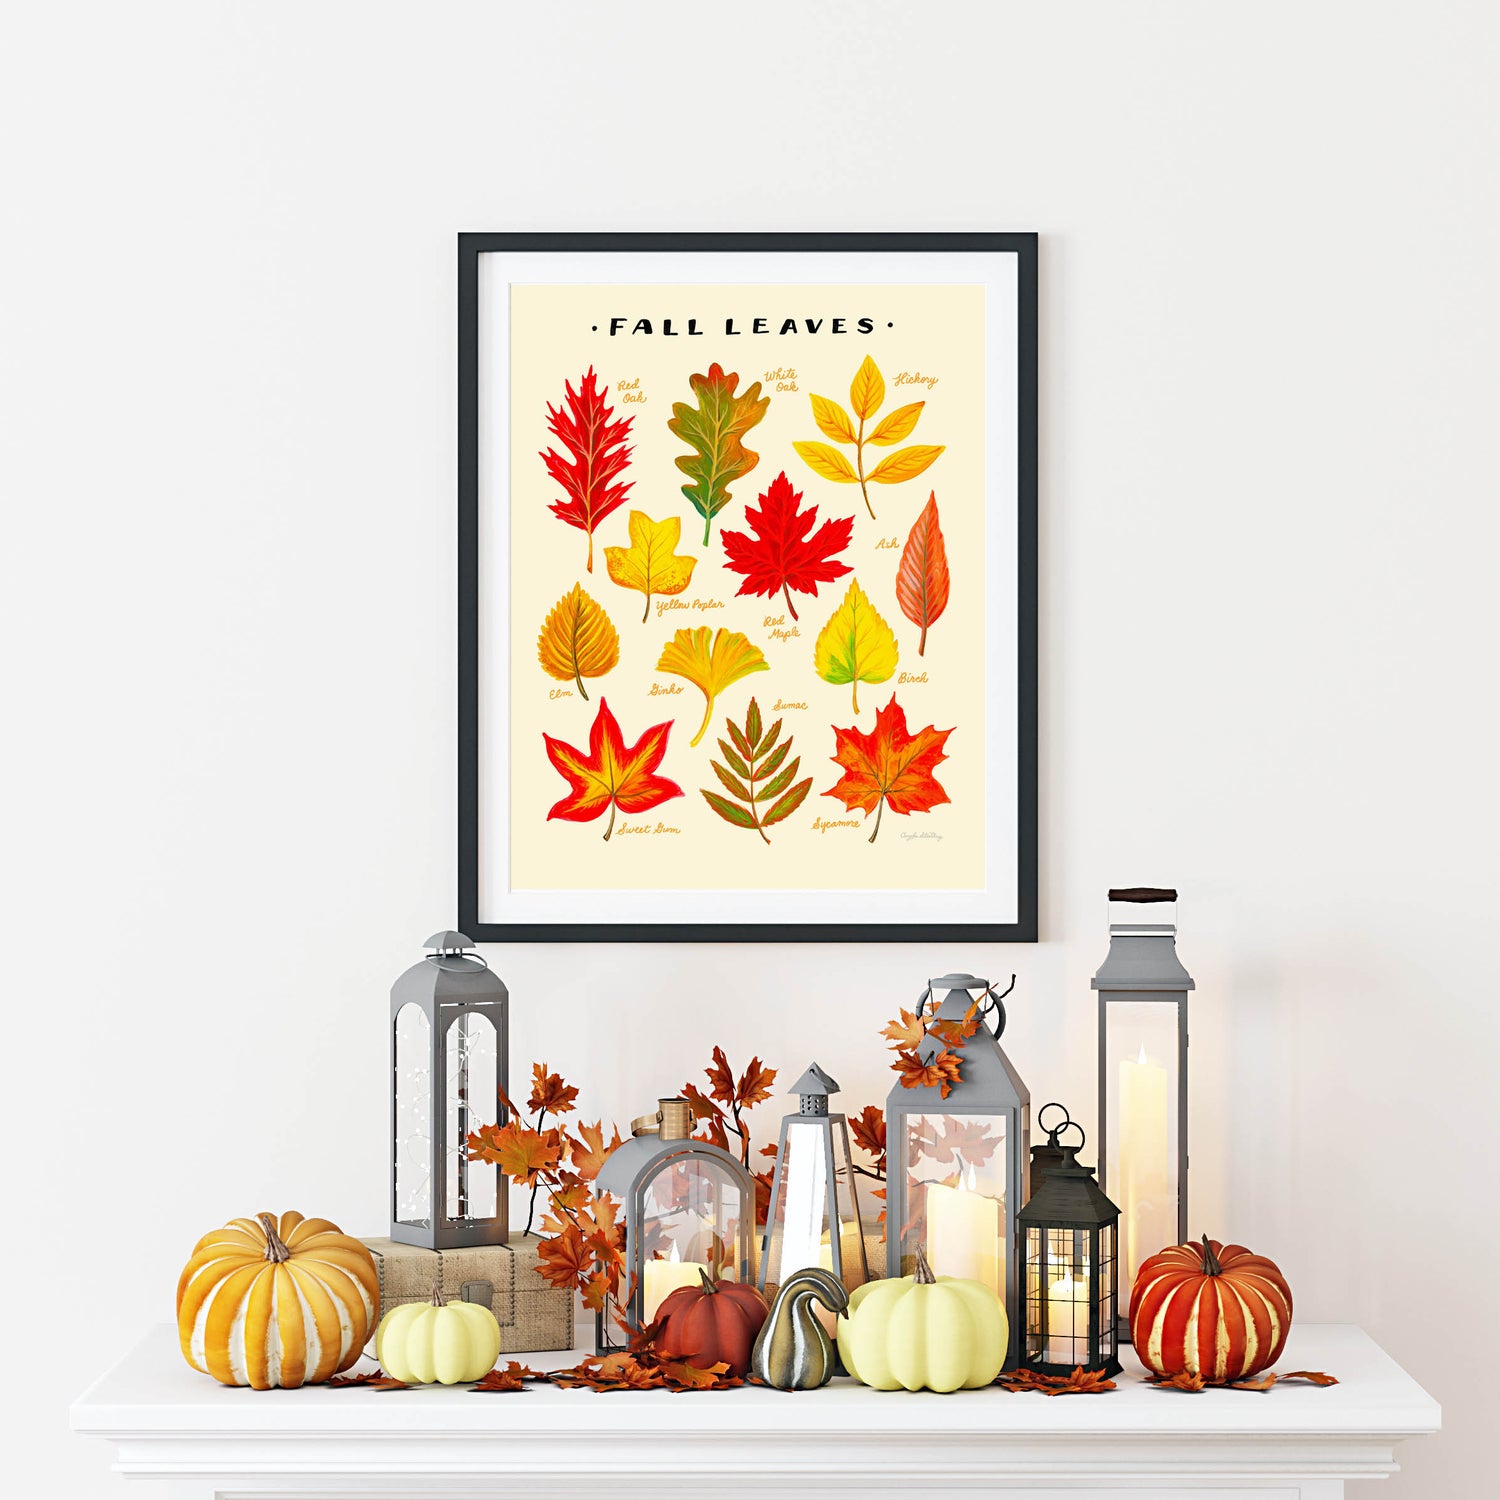 Colorful fall leaves illustration in a black frame with fall decor